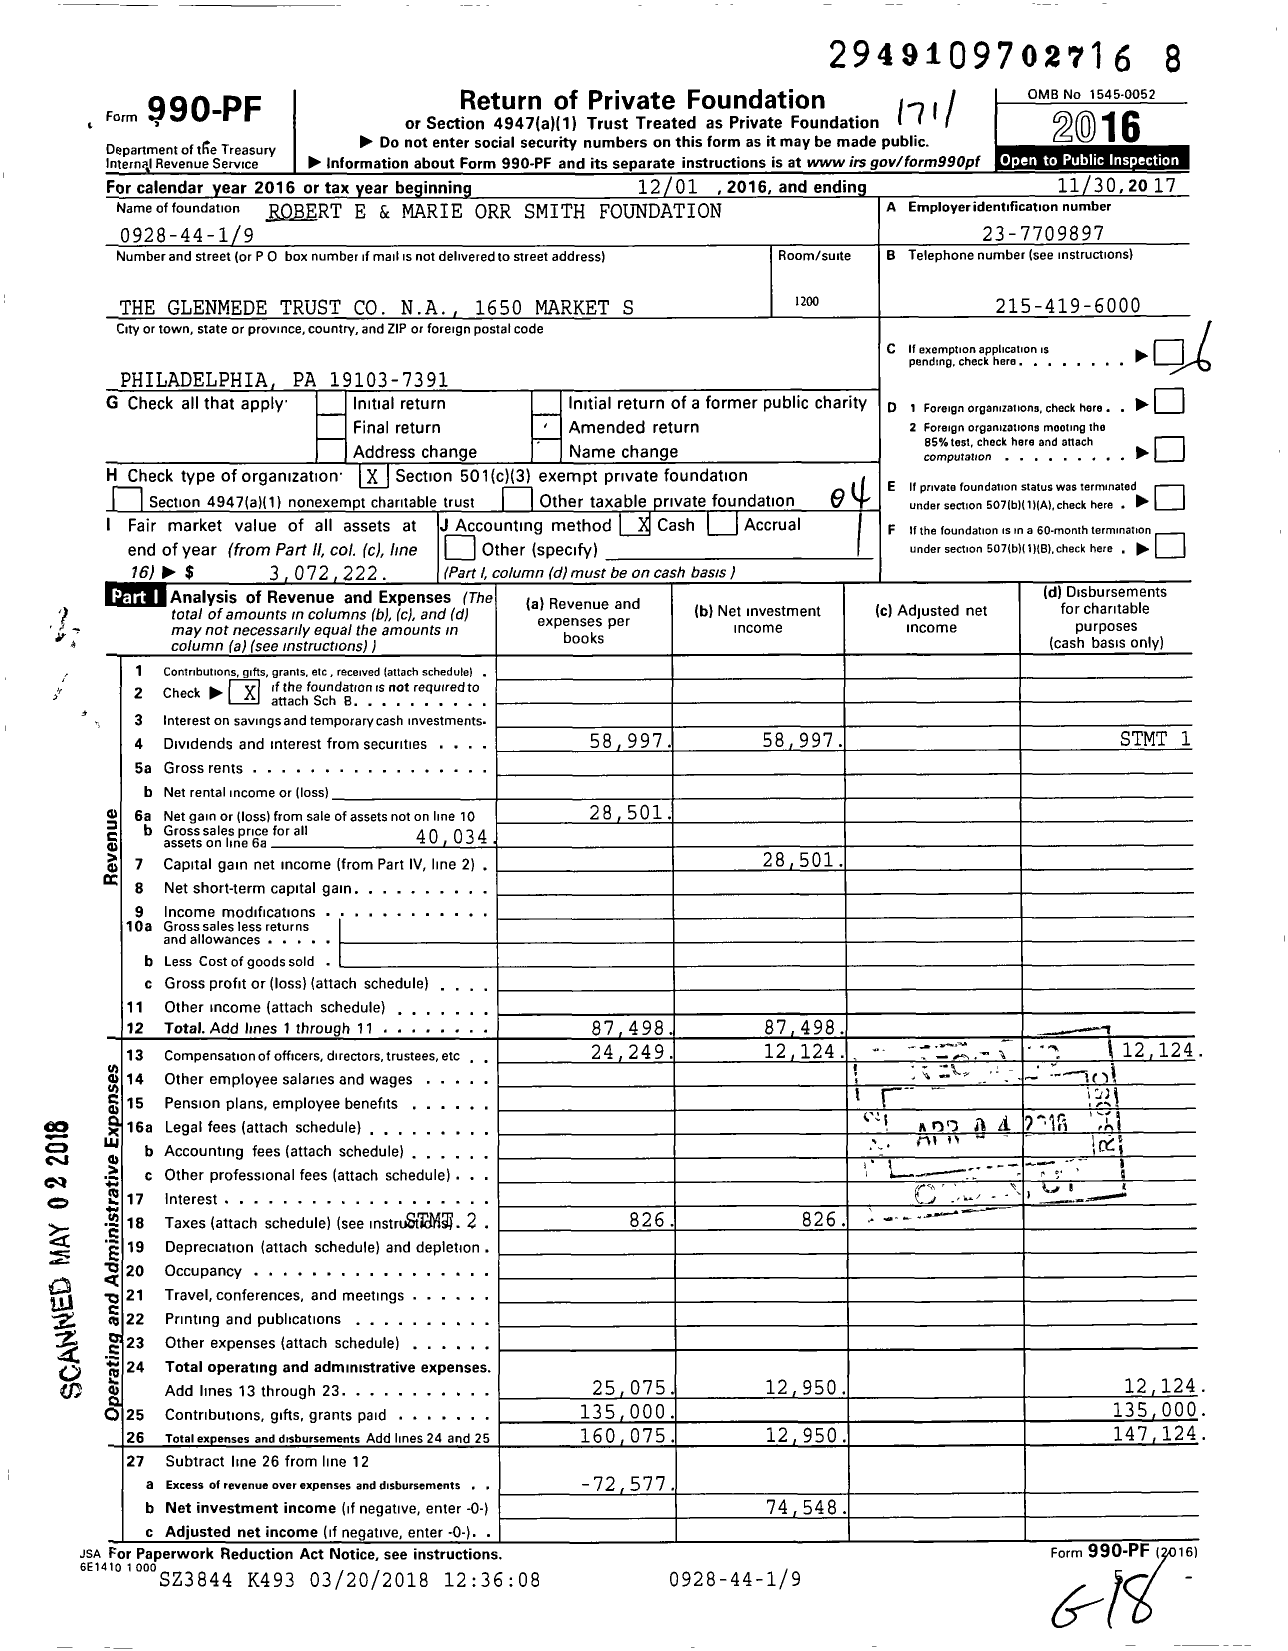 Image of first page of 2016 Form 990PF for Robert E and Marie Orr Smith Foundation